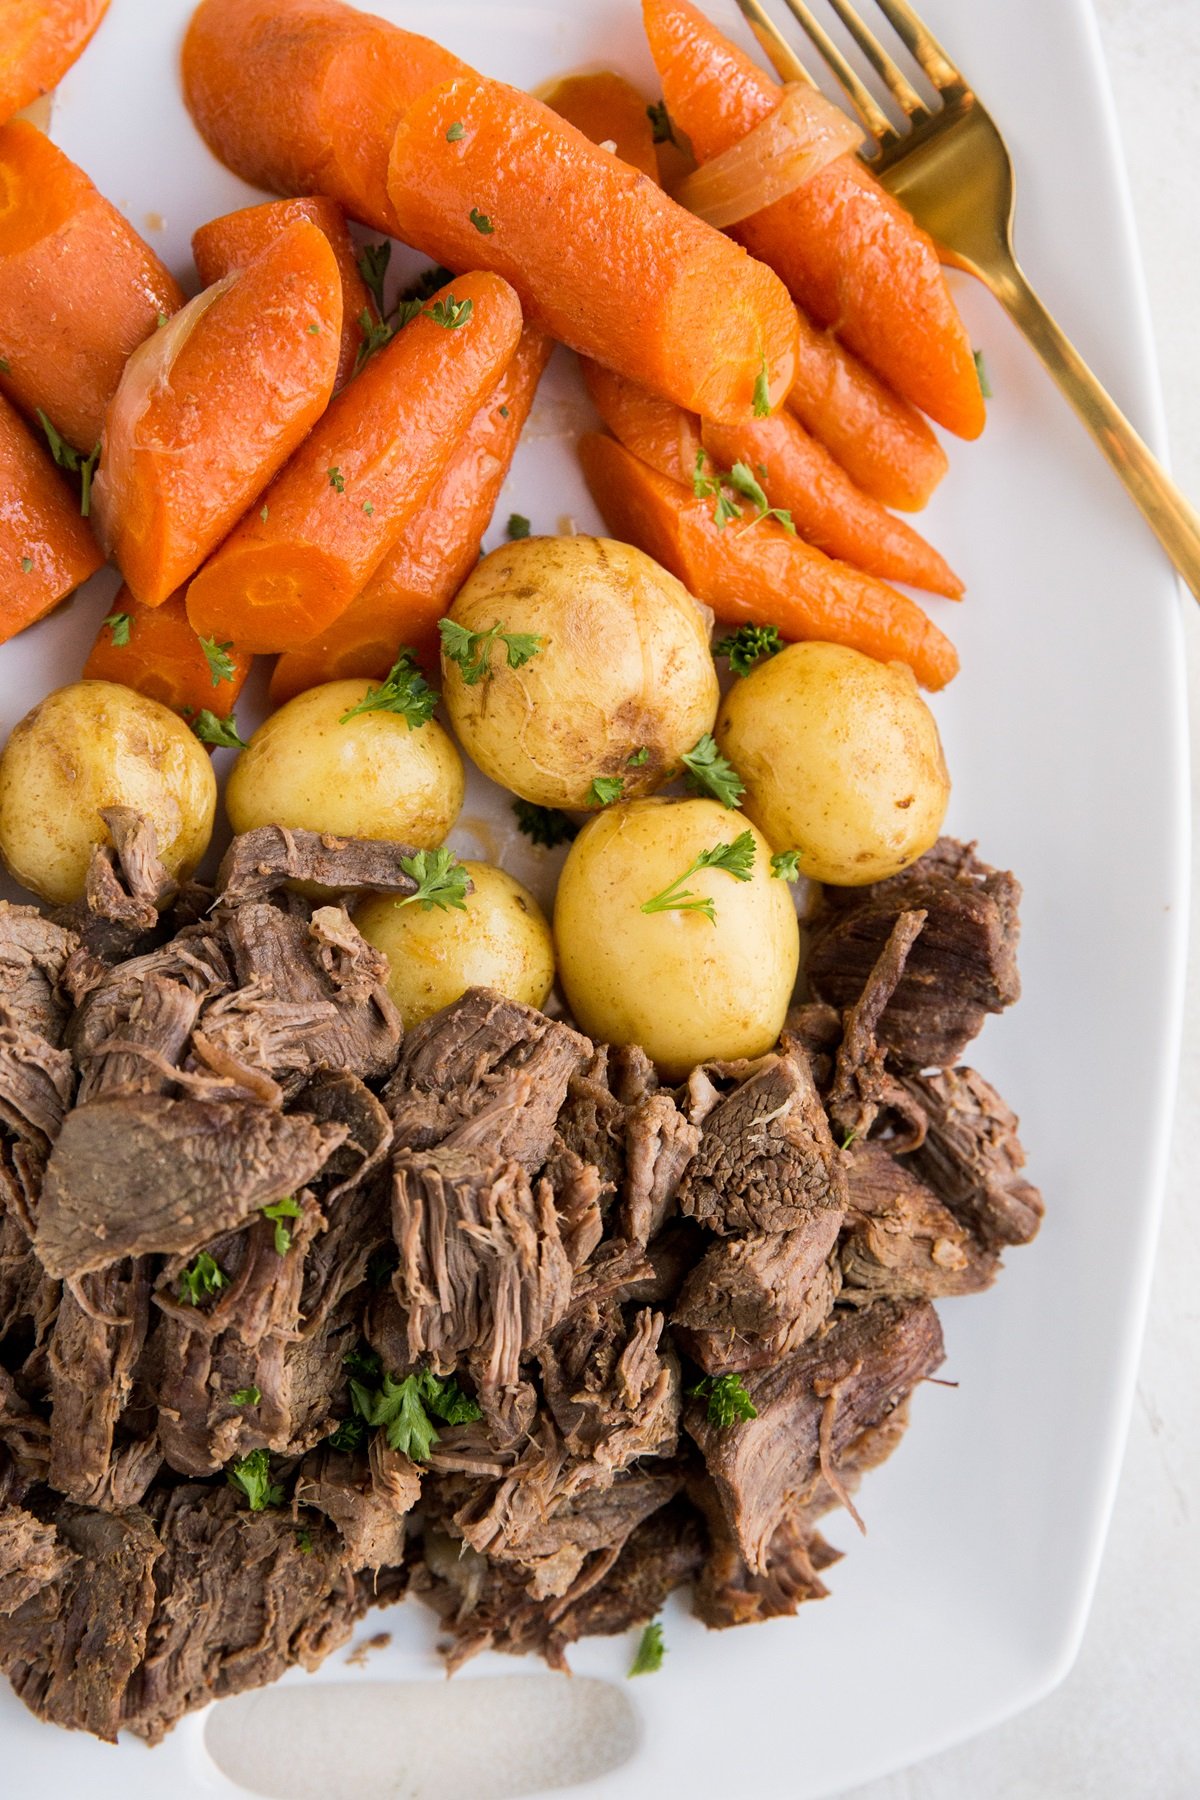 Pot Roast with vegetables on a platter, ready to serve.